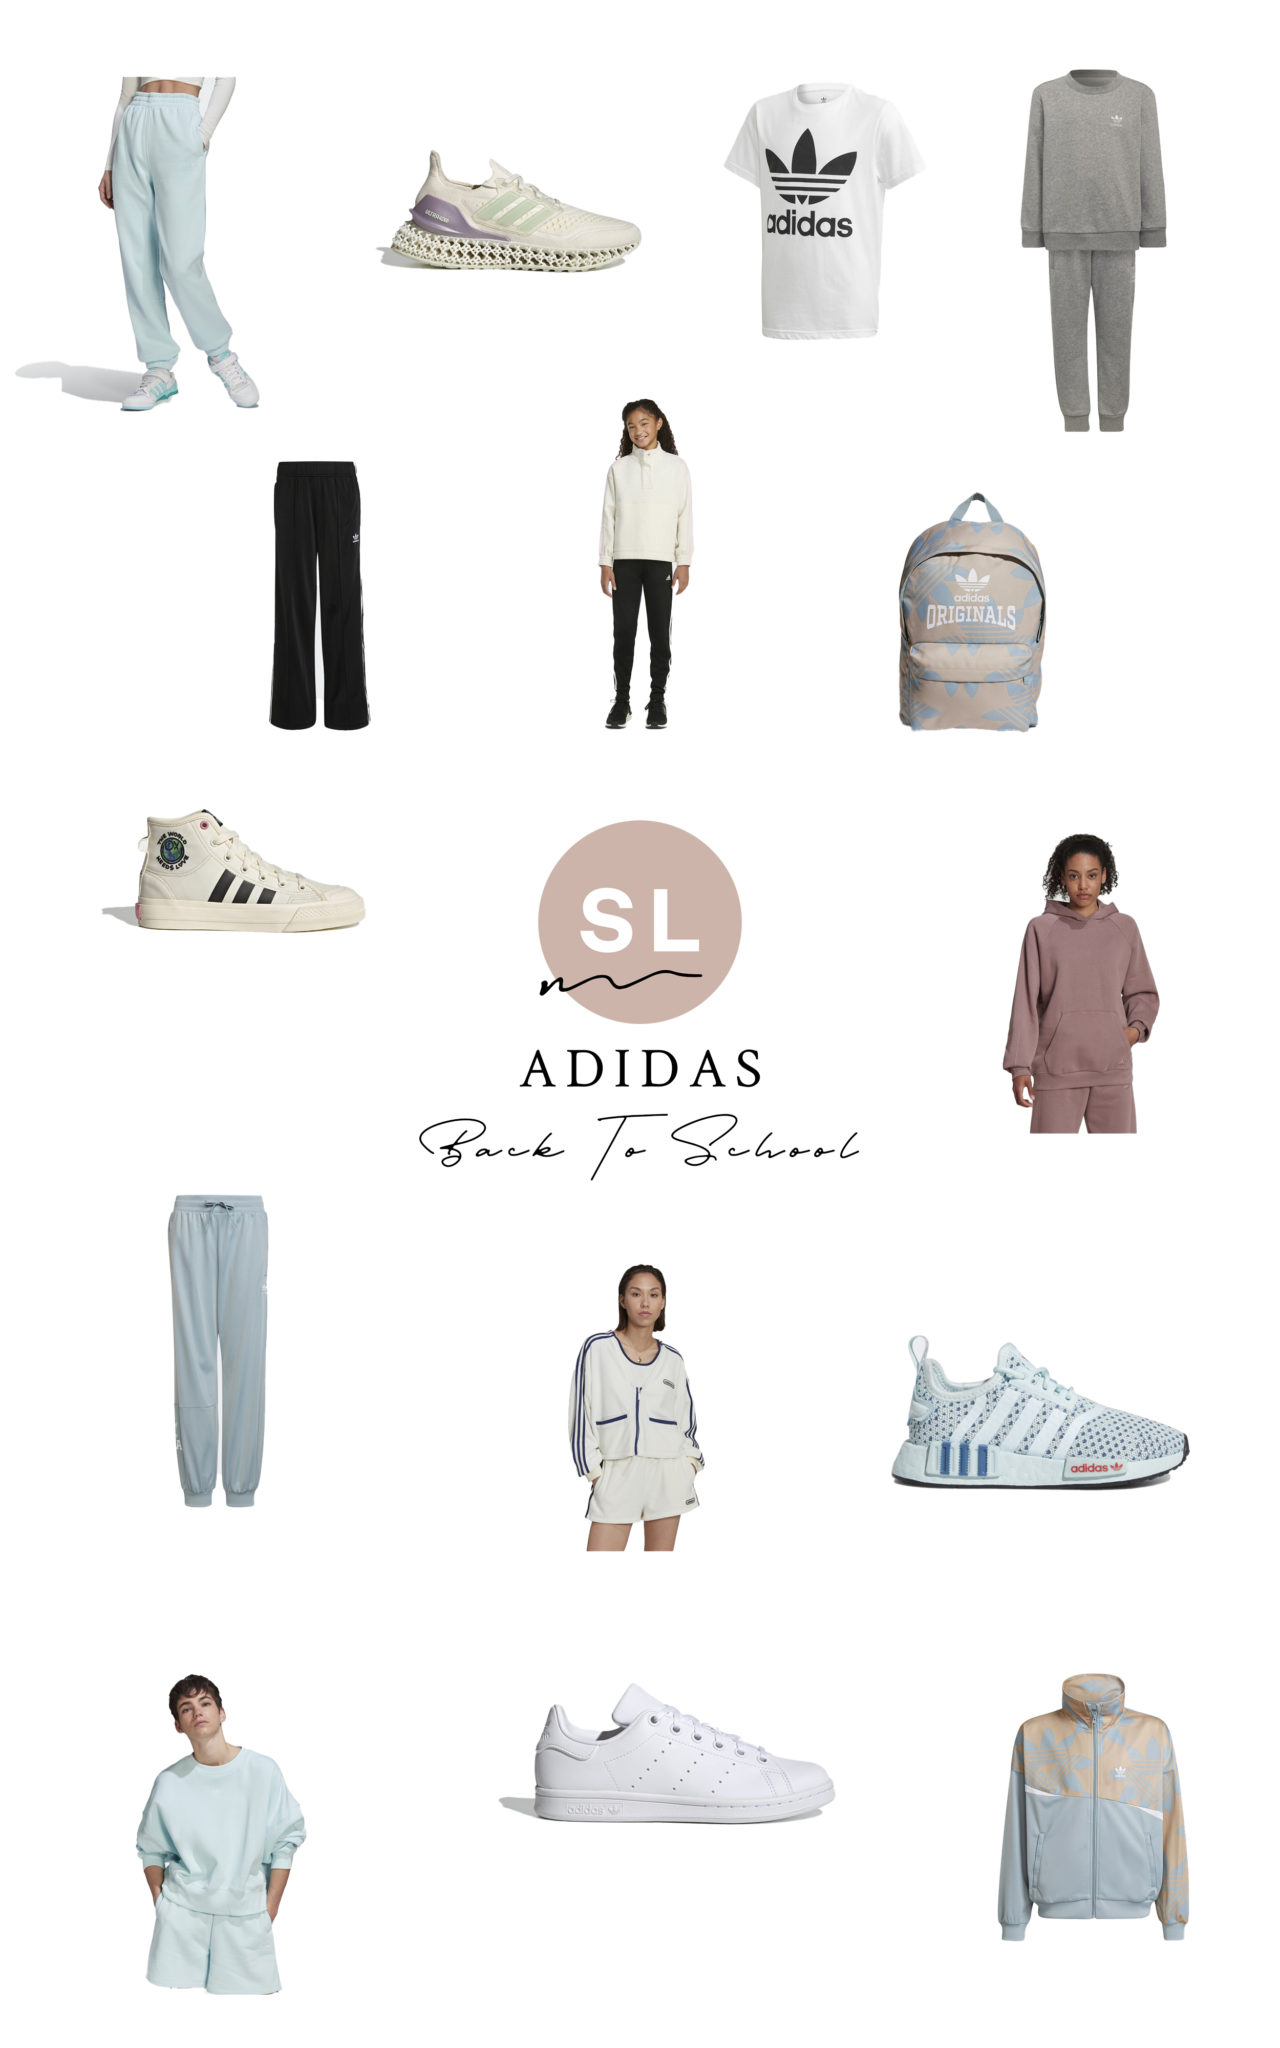 Back to school with adidas